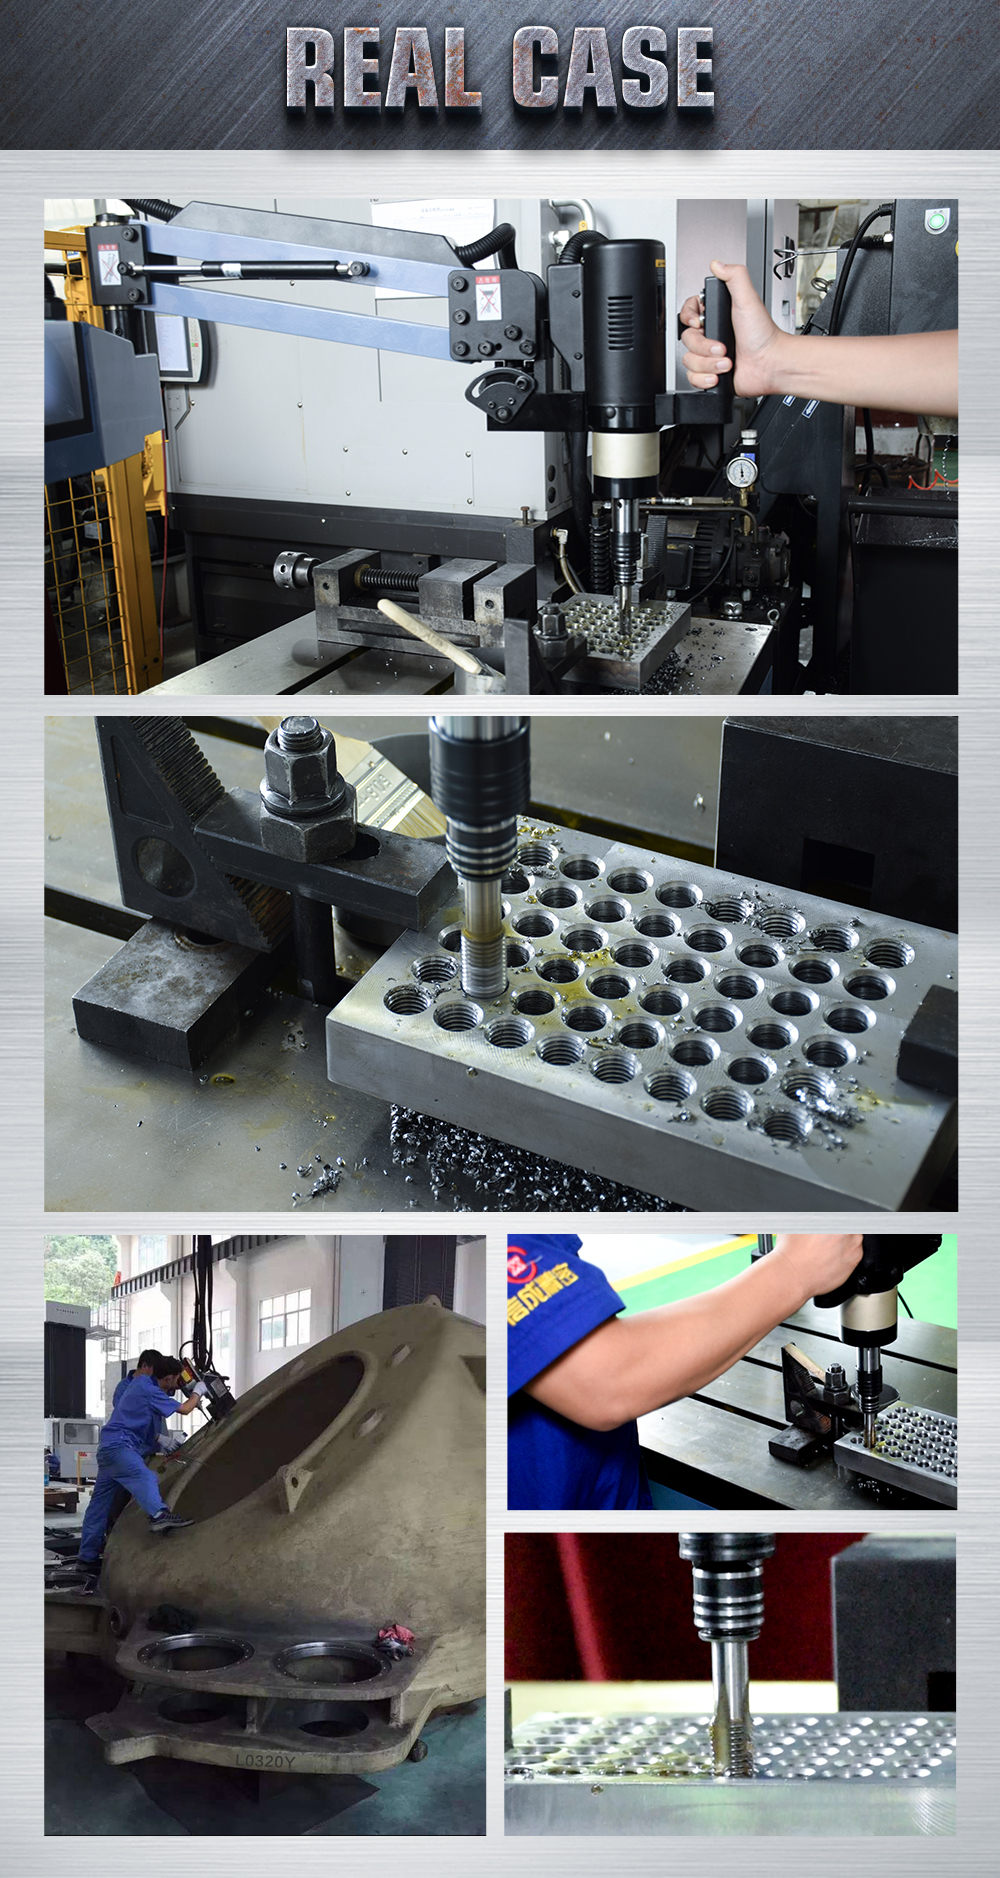 SFX-M16R M3-M16 Electric Tapping Machine Universal Tapping Arm Metal Tapping Machine with GT12 ANSI Collets SFX-M16R M3-M16 Electric Tapping Machine with GT12 ANSI Collets